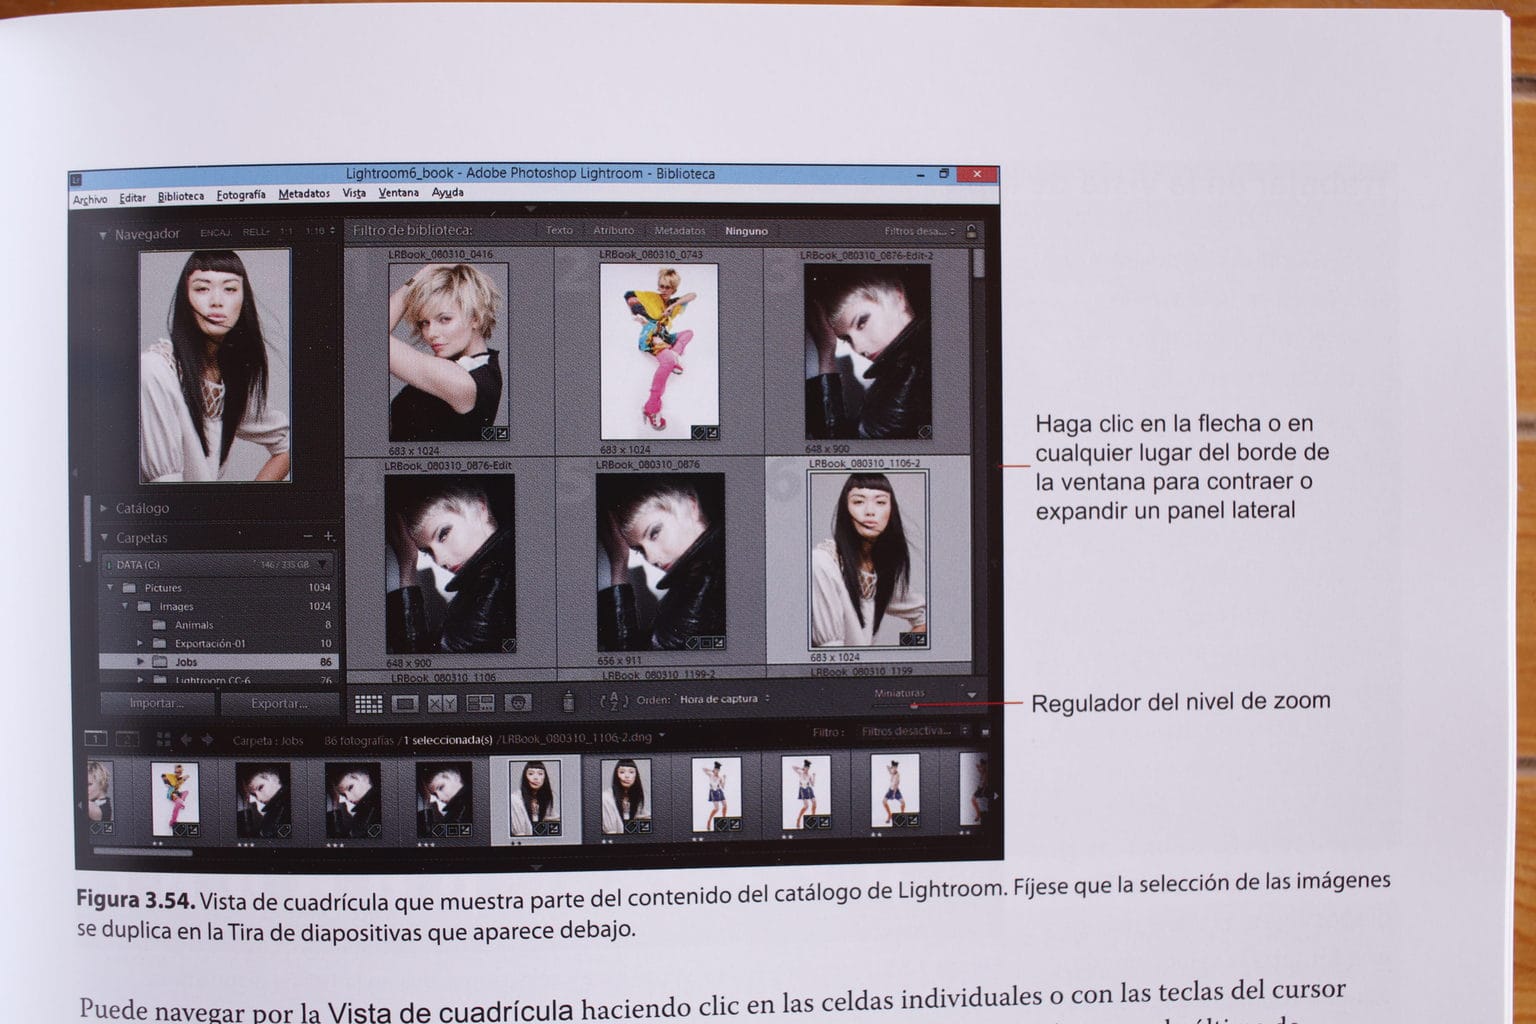 LITERARY RECOMMENDATION: THE MOST COMPLETE GUIDE TO LIGHTROOM (BY MARTIN EVENING)